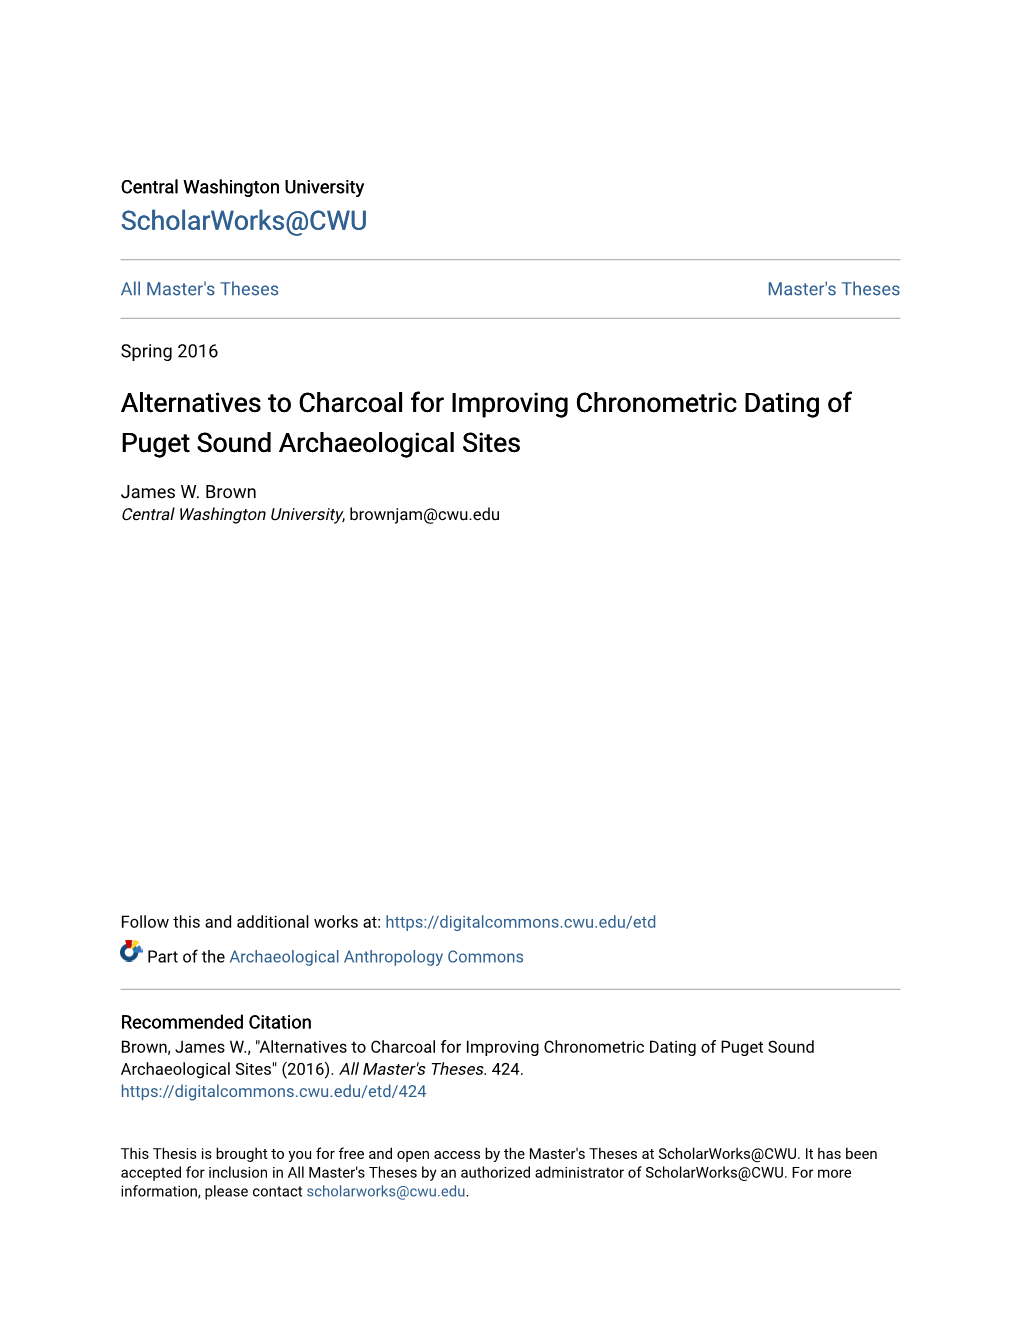 Alternatives to Charcoal for Improving Chronometric Dating of Puget Sound Archaeological Sites